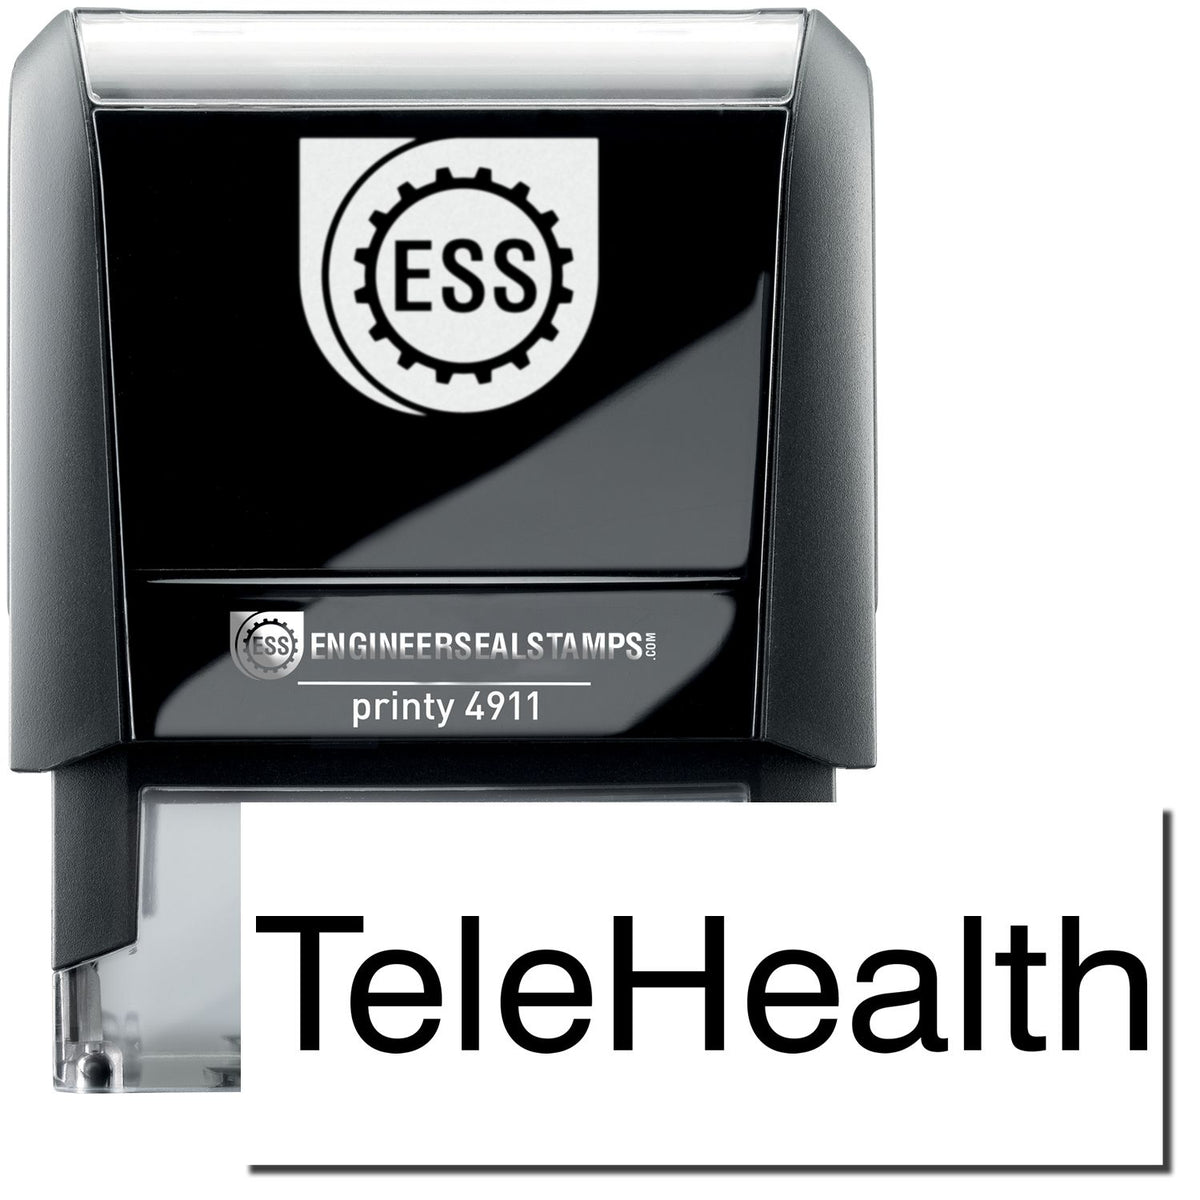 A self-inking stamp with a stamped image showing how the text &quot;TeleHealth&quot; is displayed after stamping.